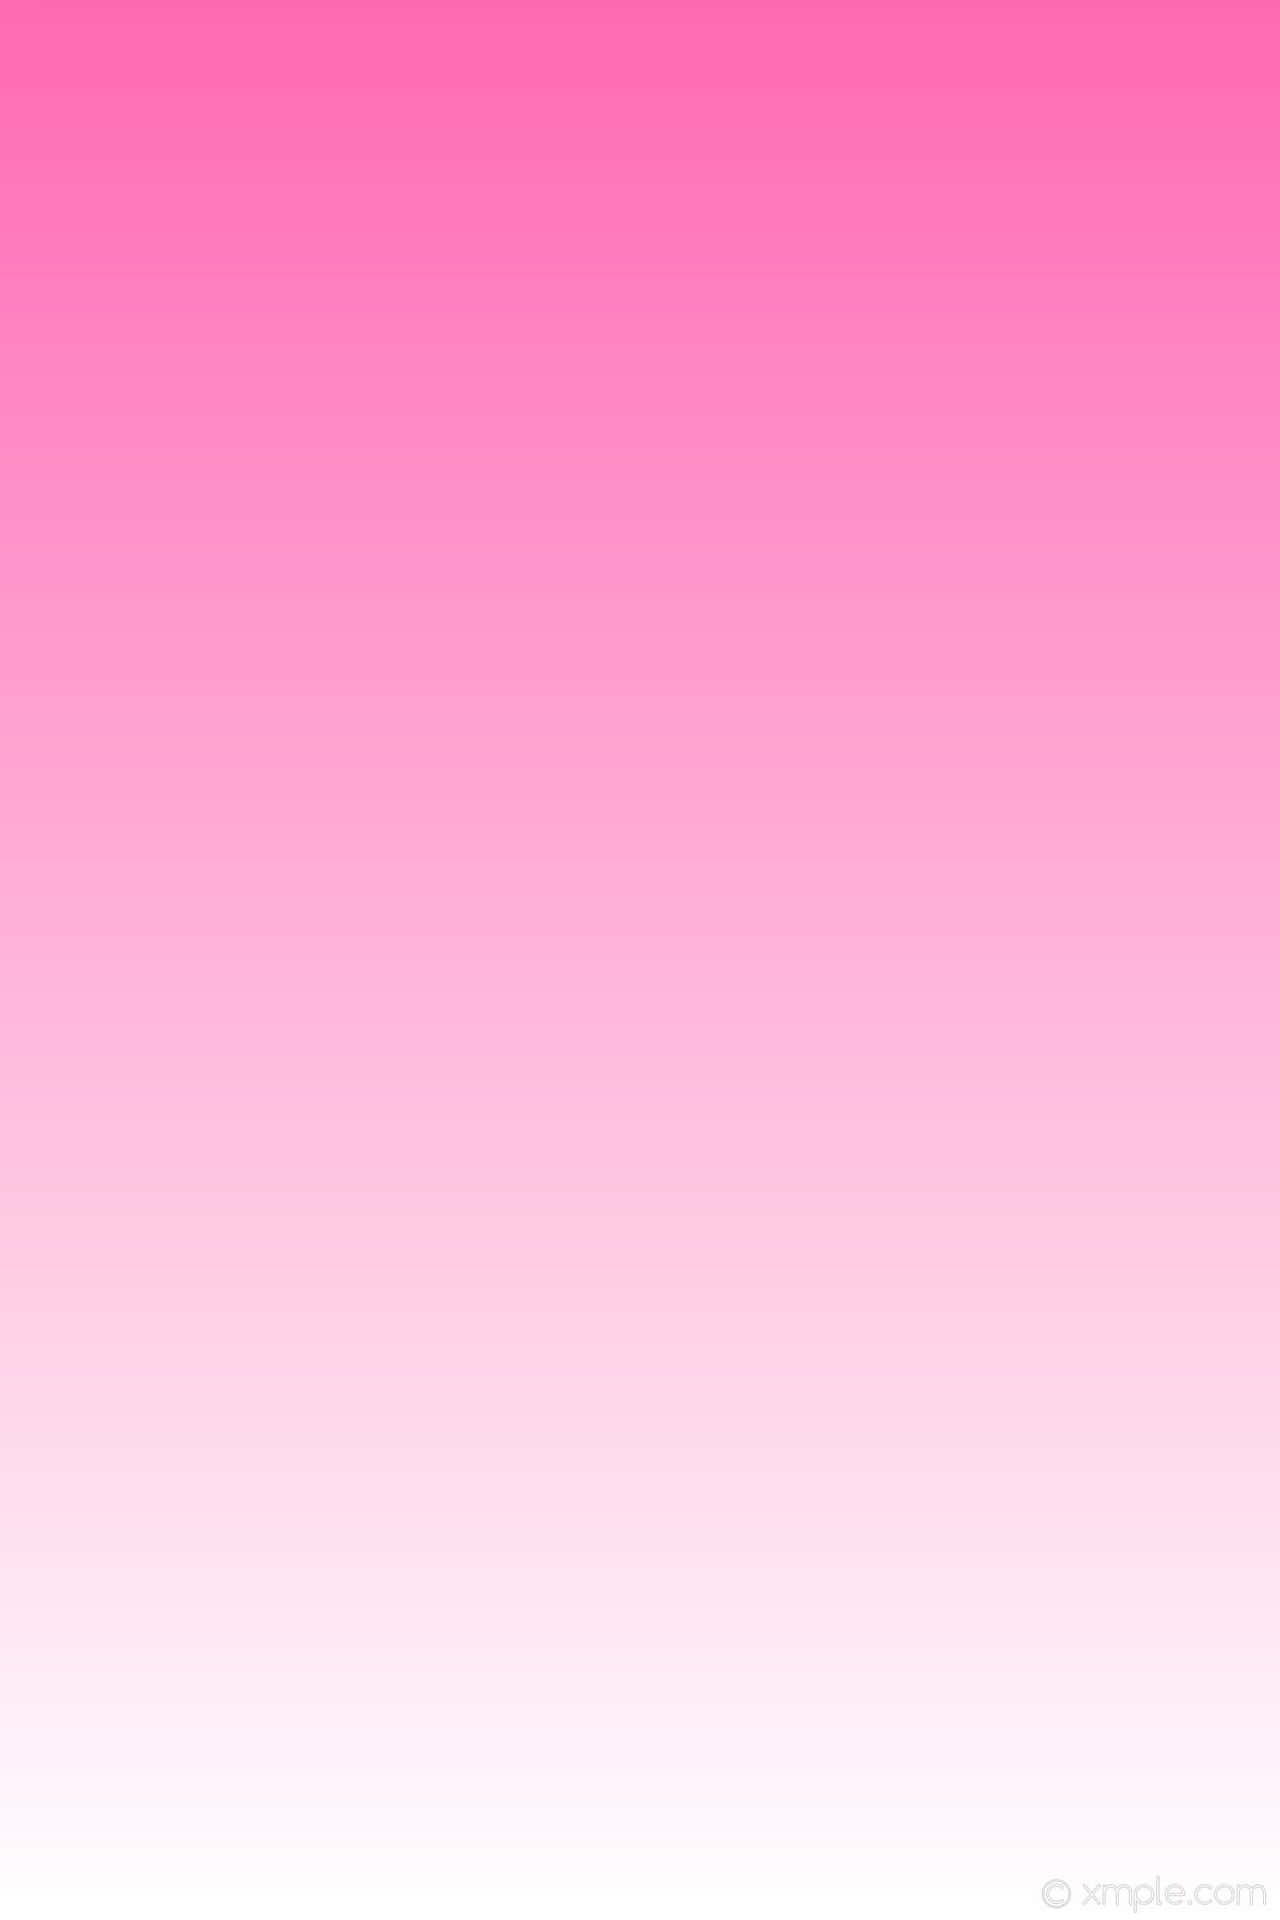 Pink Ombre Background 1824 X 2736